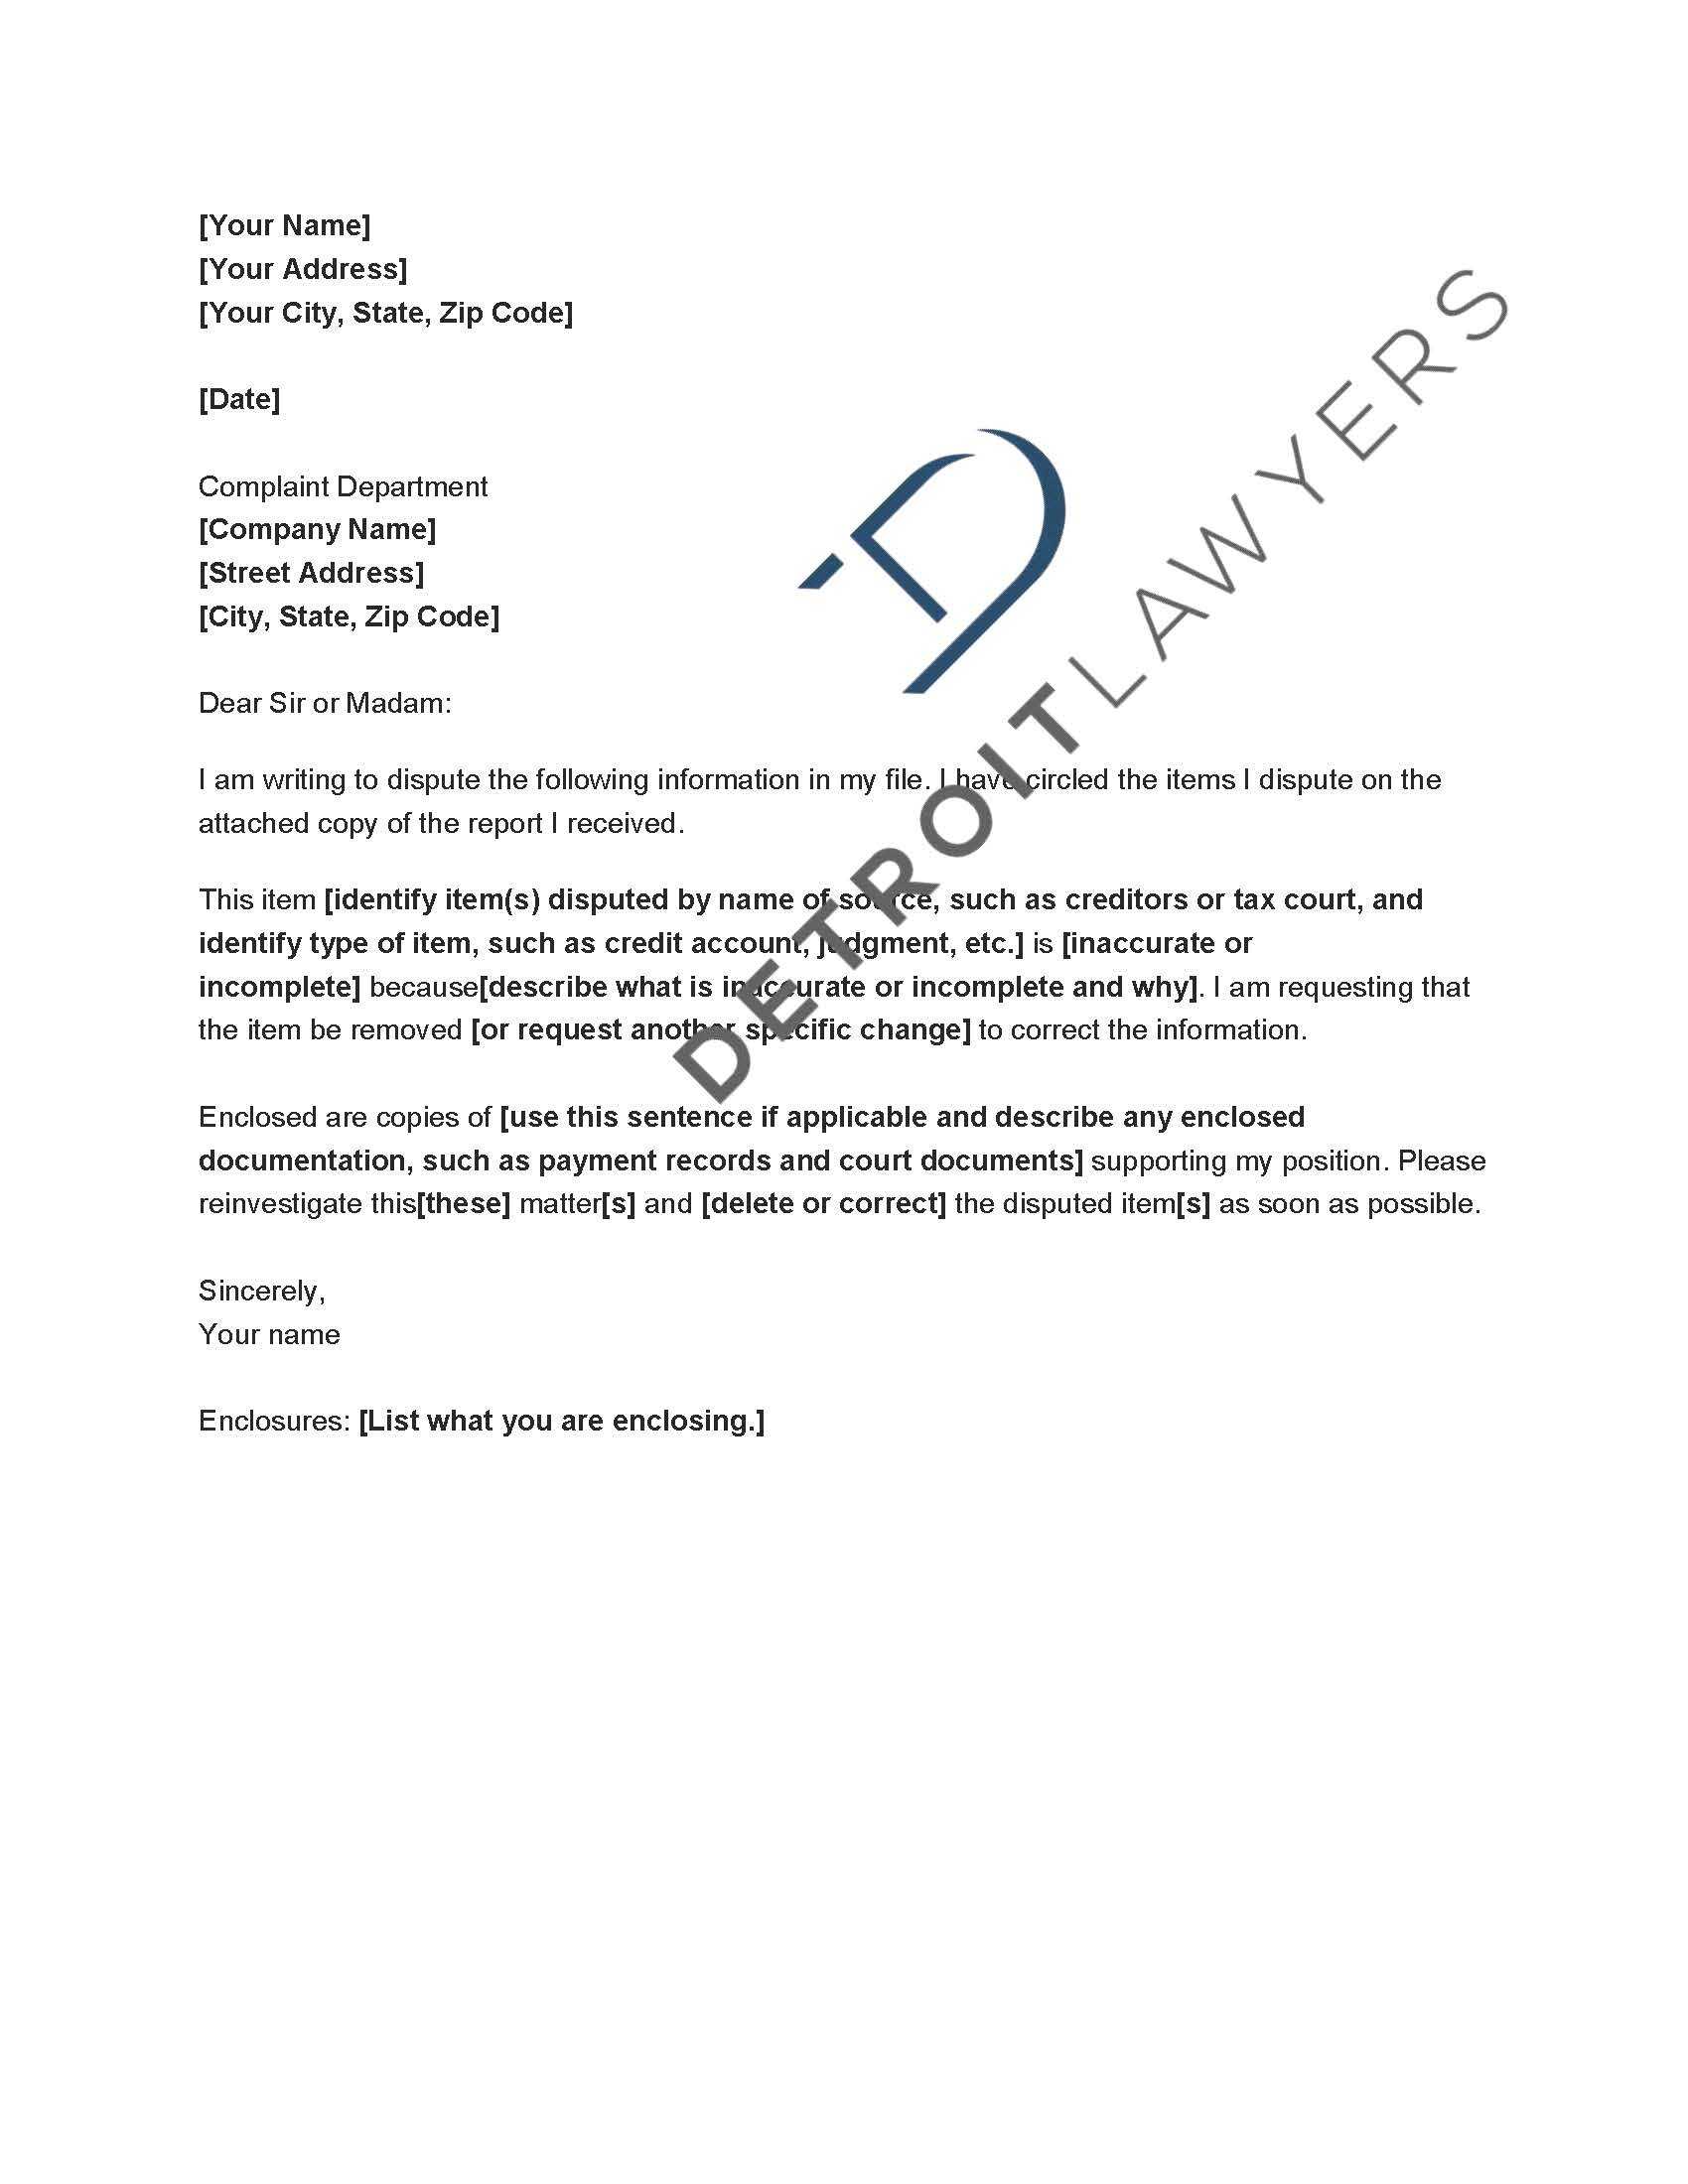 Application Letter Technical Support Customer Technical With Credit Report Dispute Letter Template